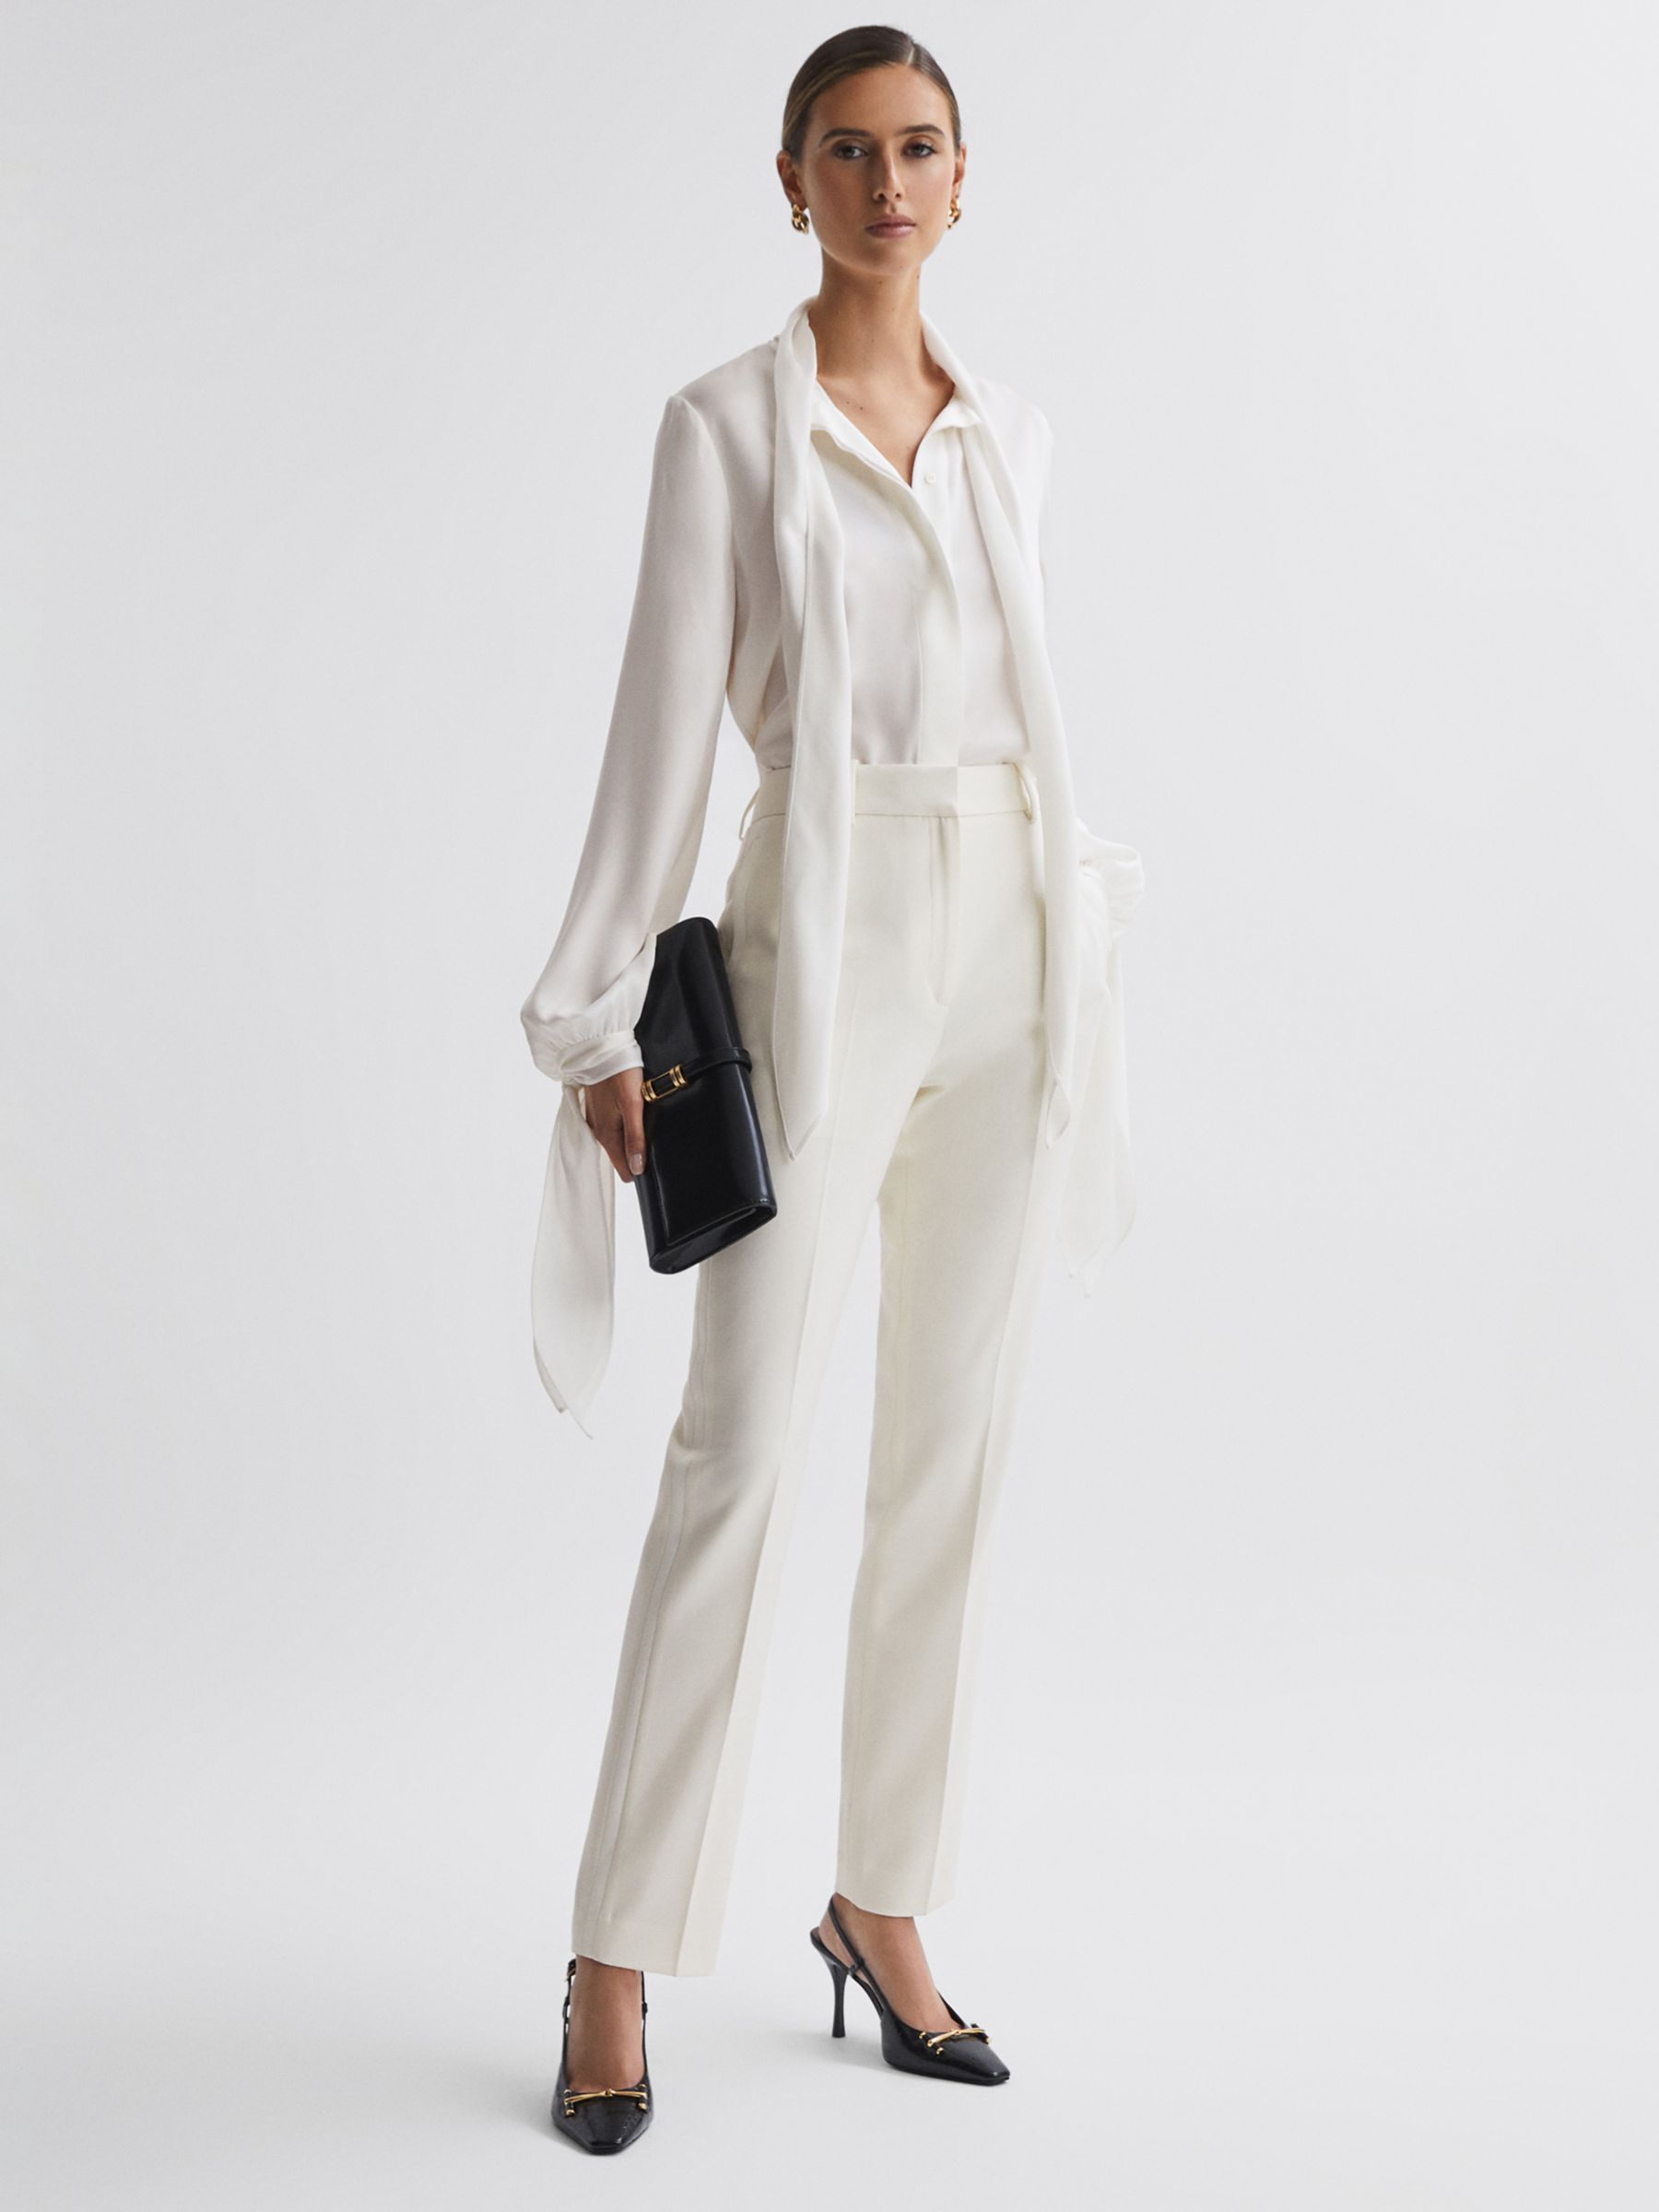 Buy Reiss Mila Slim Fit Trousers, Off White Online at johnlewis.com